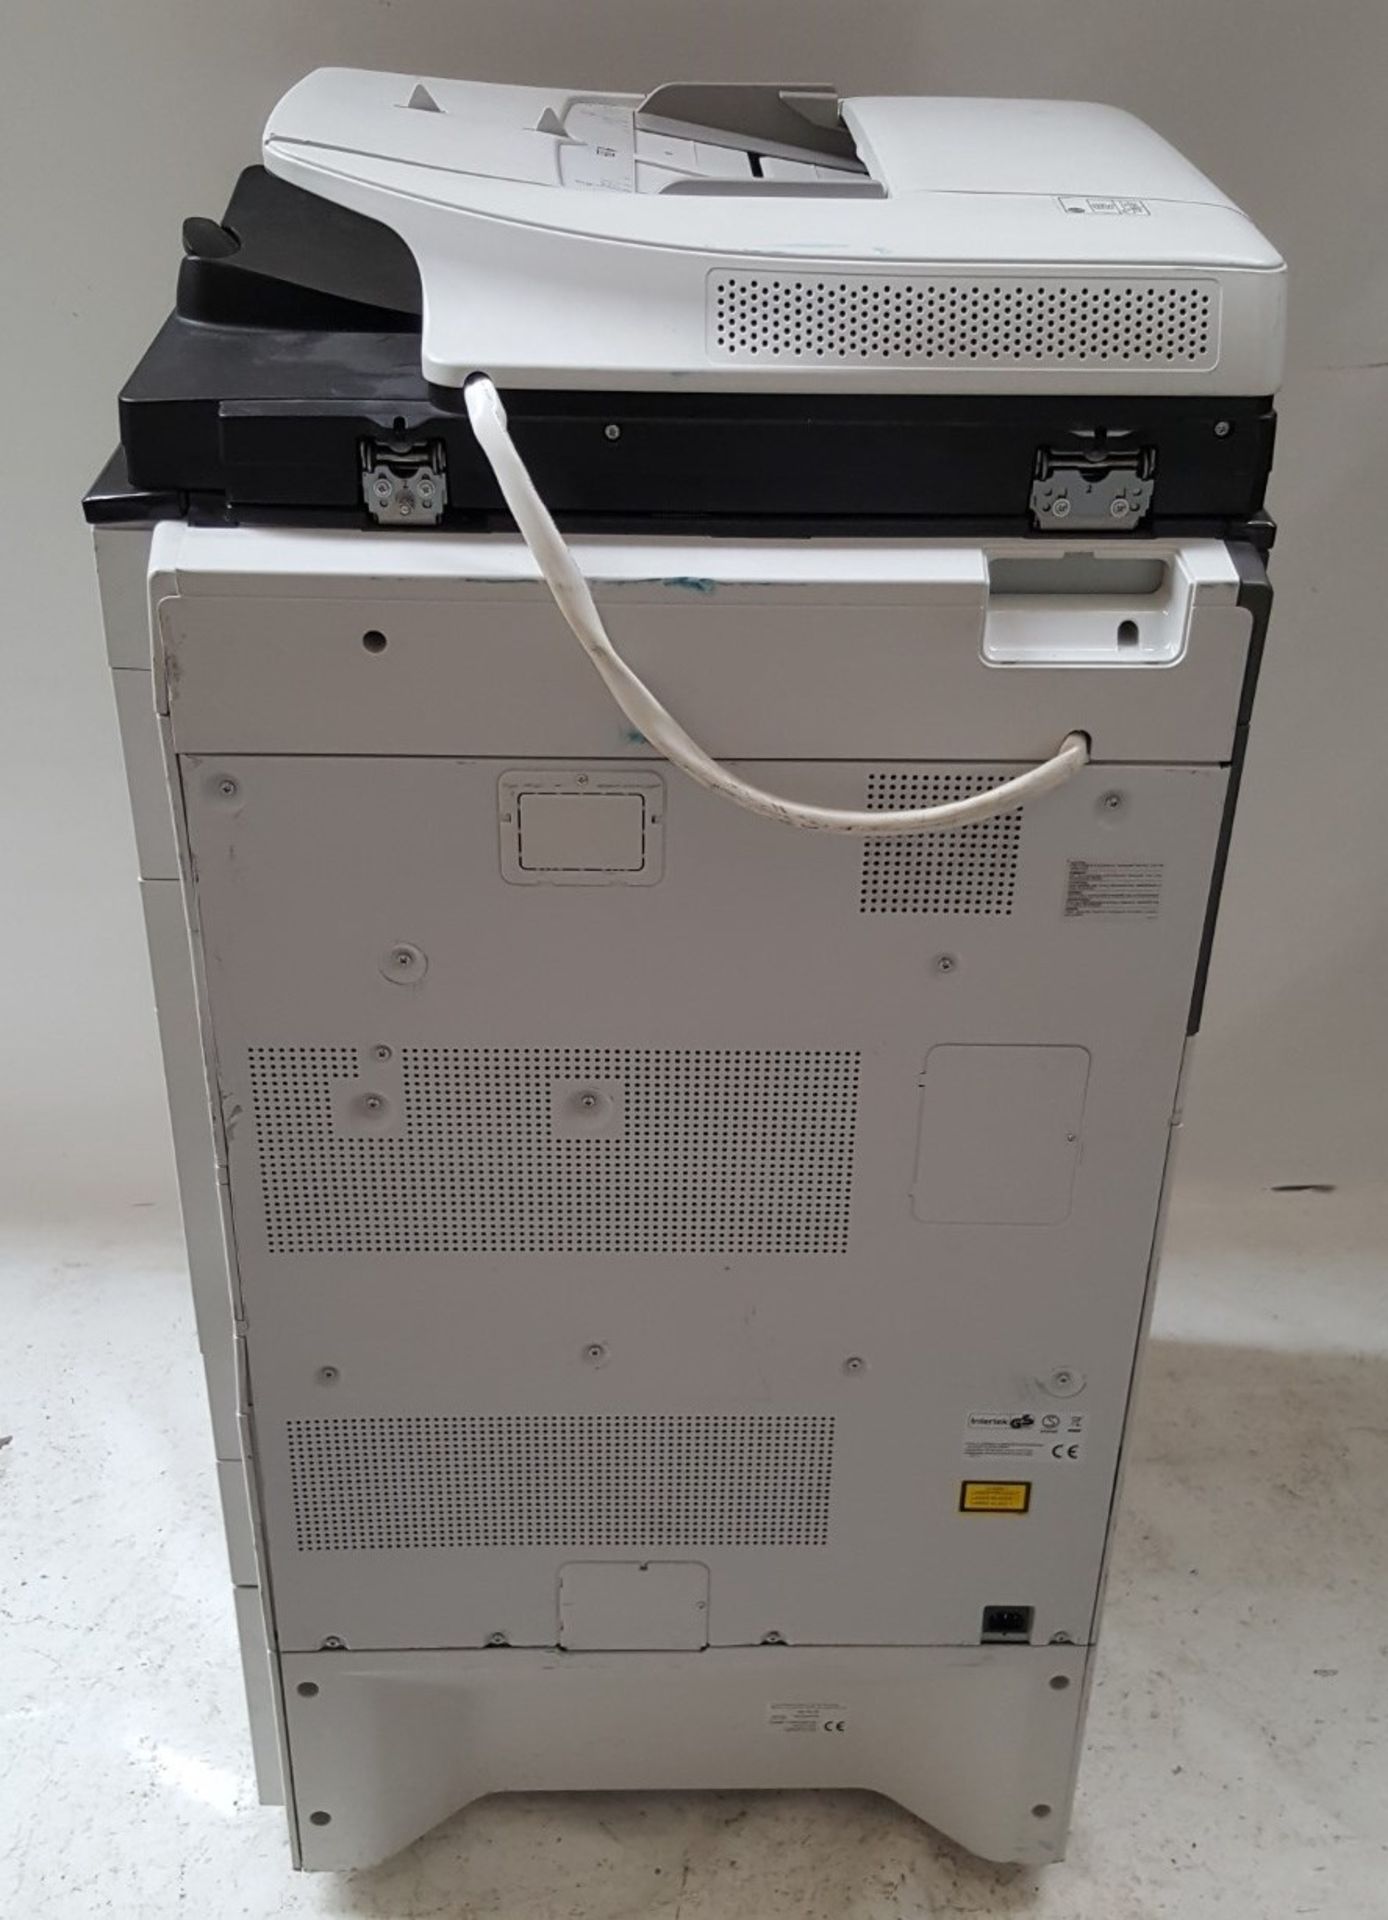 1 x Sharp MX-5112N Digital Copier Office Printer - Tested and Working - Ref CQ253 - CL422 - - Image 7 of 7